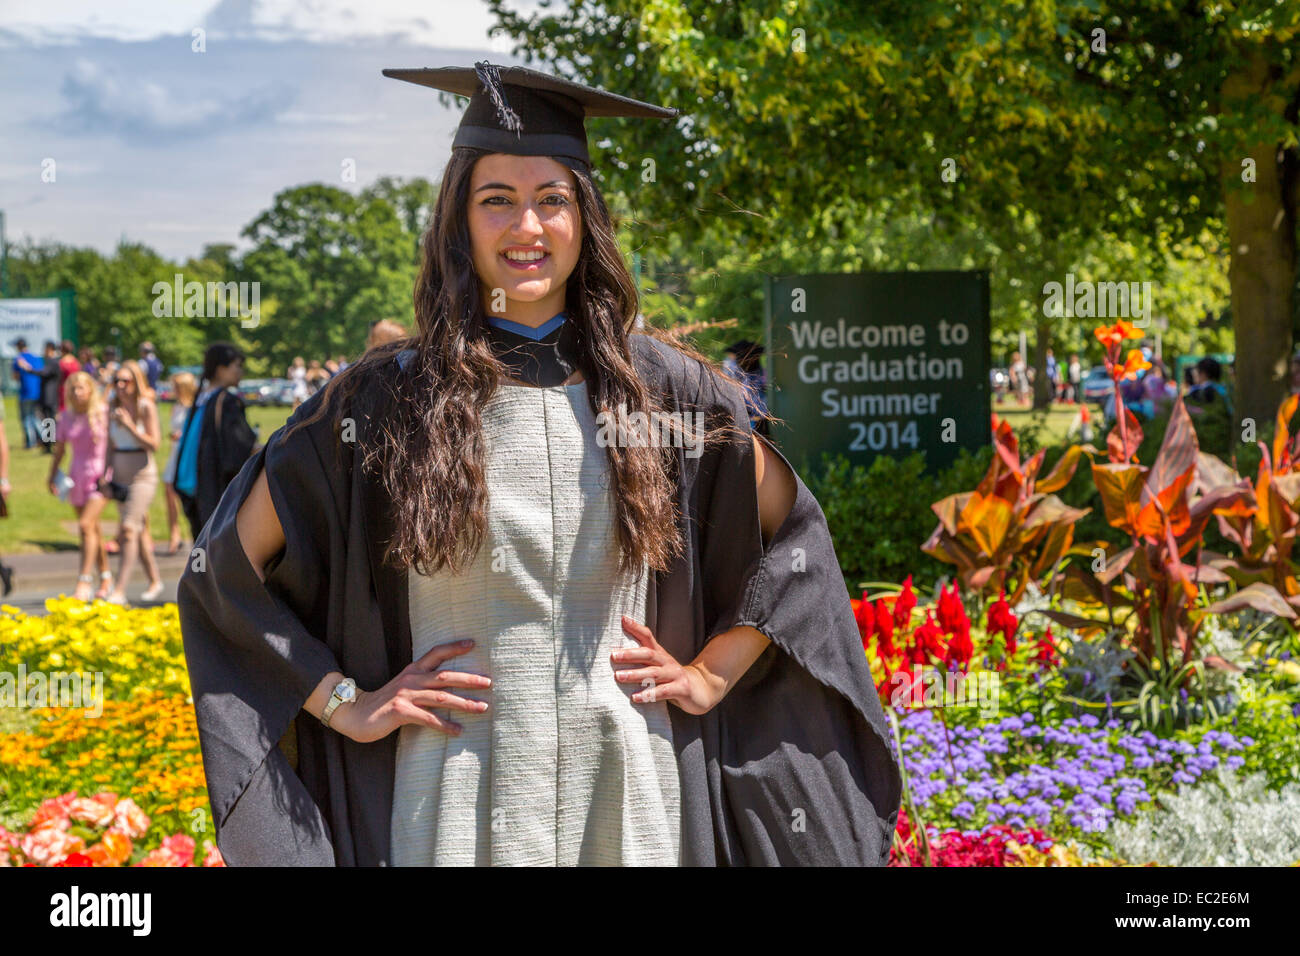 A Female University Student Posing in her Graduation Cap and Gown Stock Photo